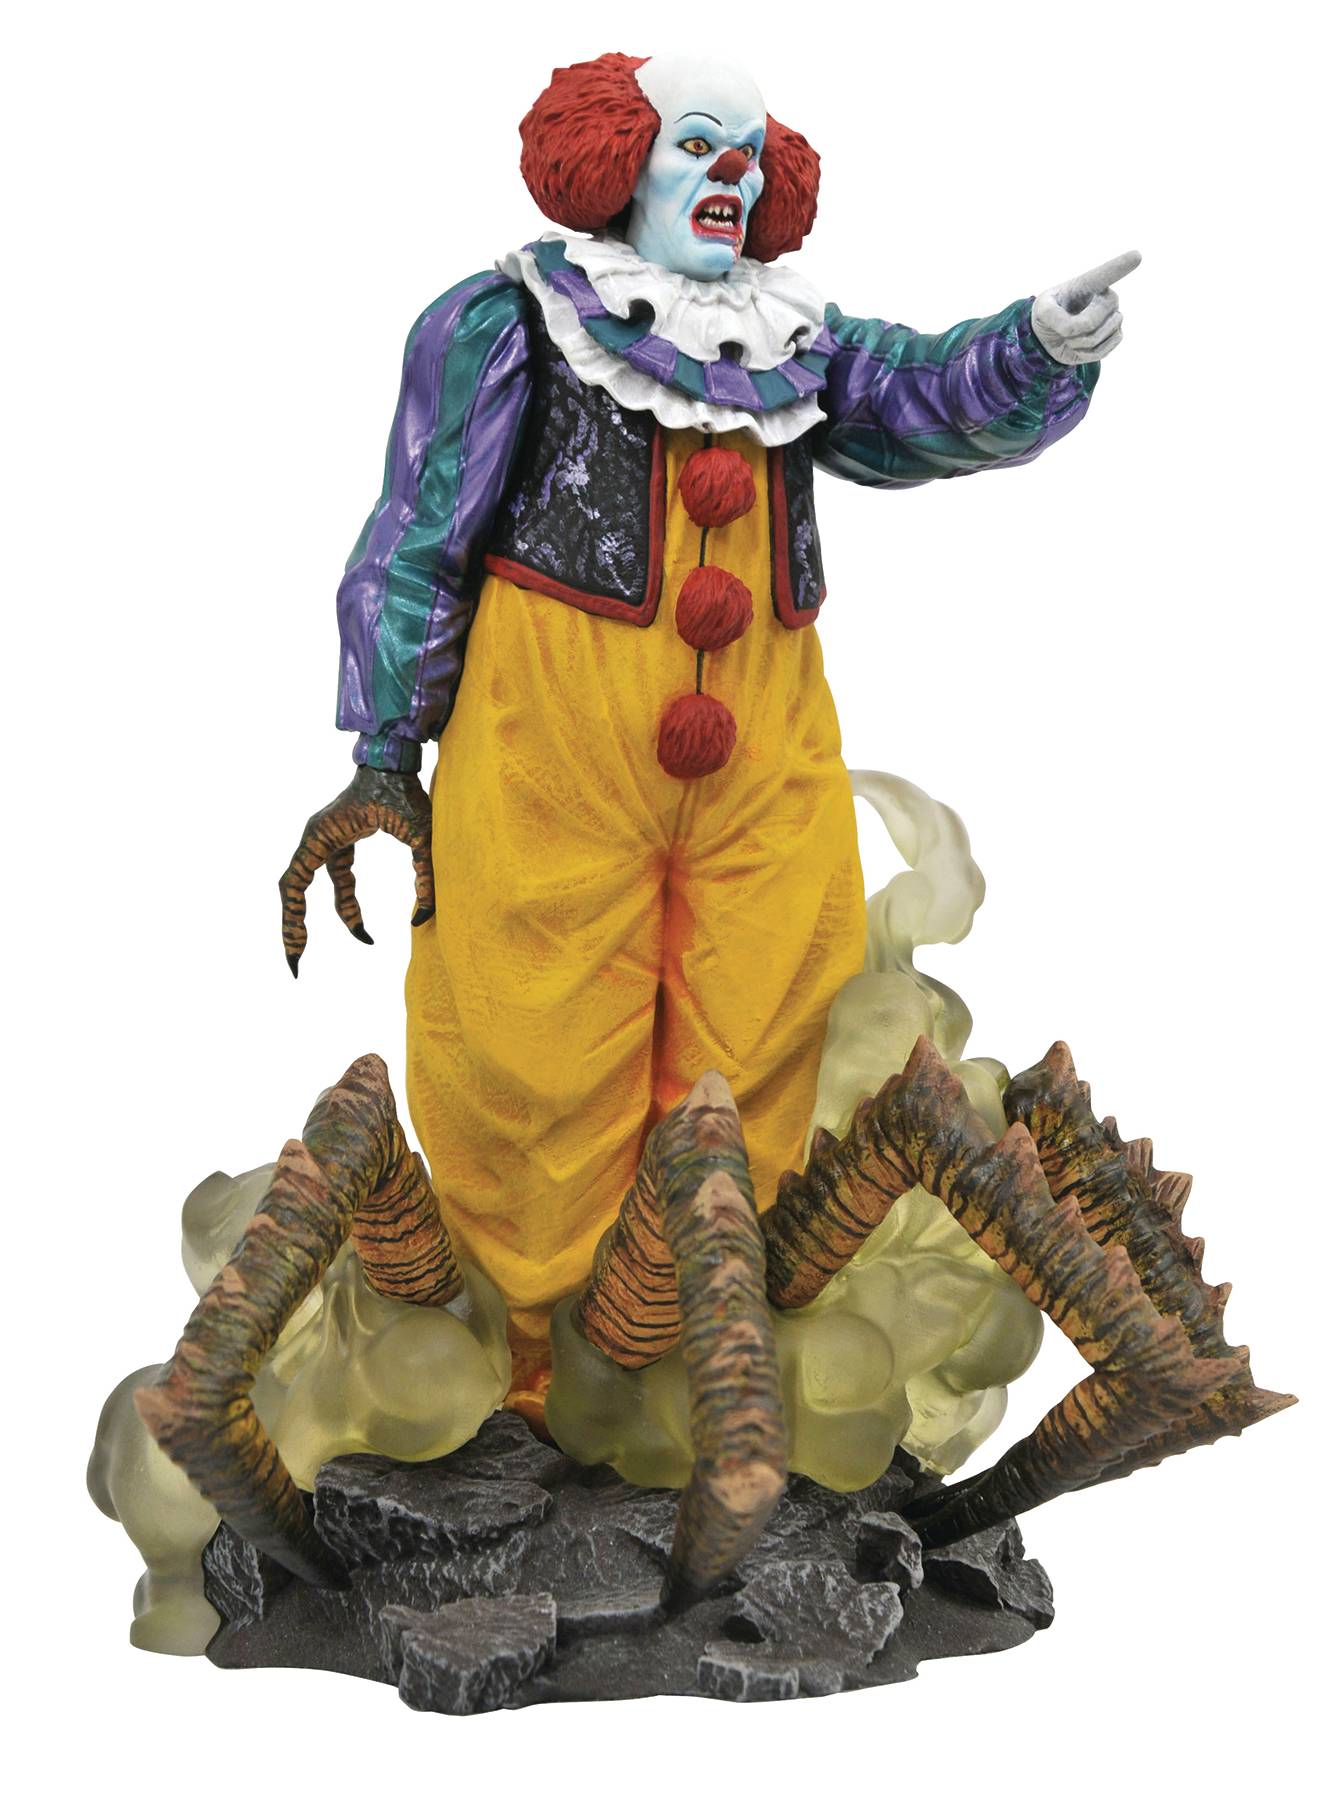 IT 1990 GALLERY PENNYWISE PVC STATUE